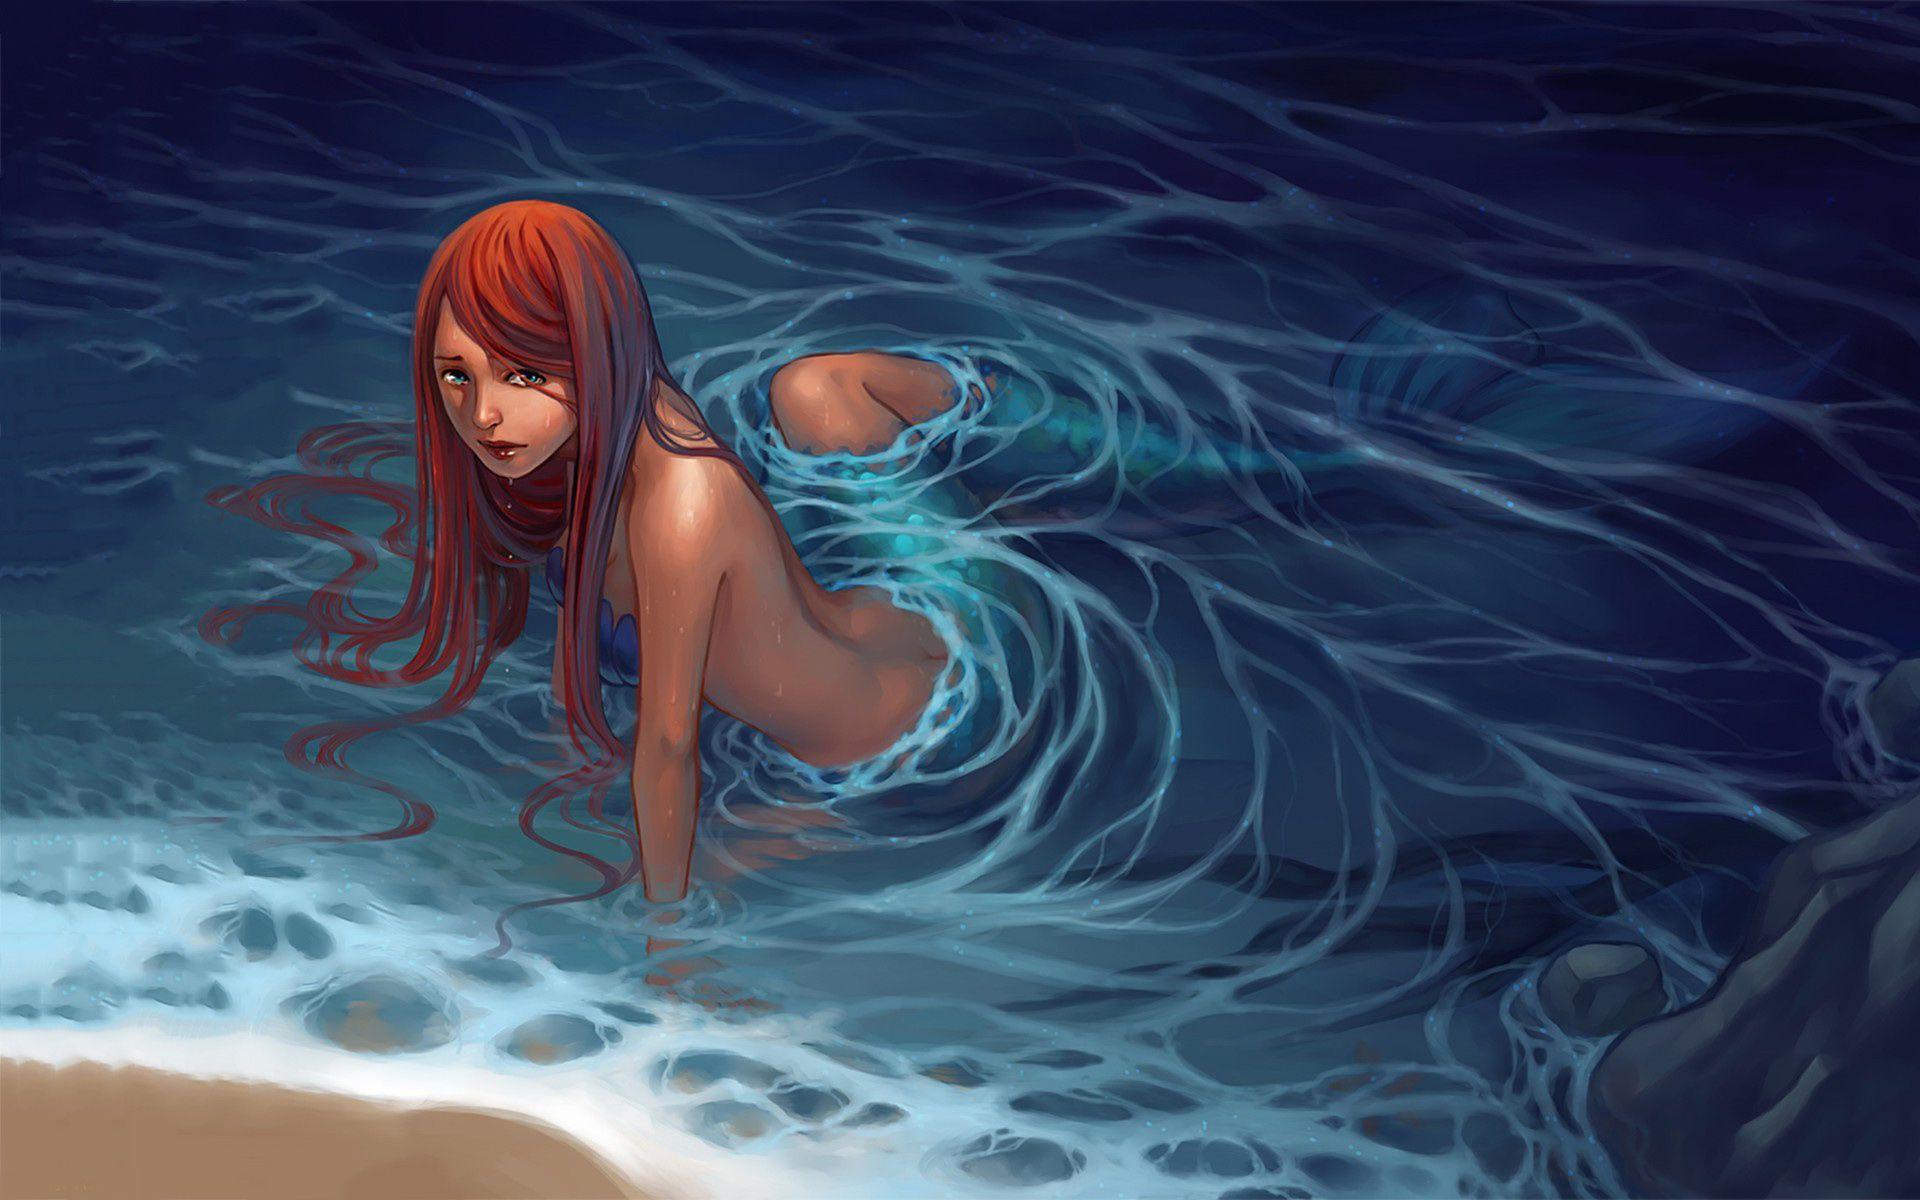 Anime Mermaids Wallpapers Wallpaper Cave Images, Photos, Reviews